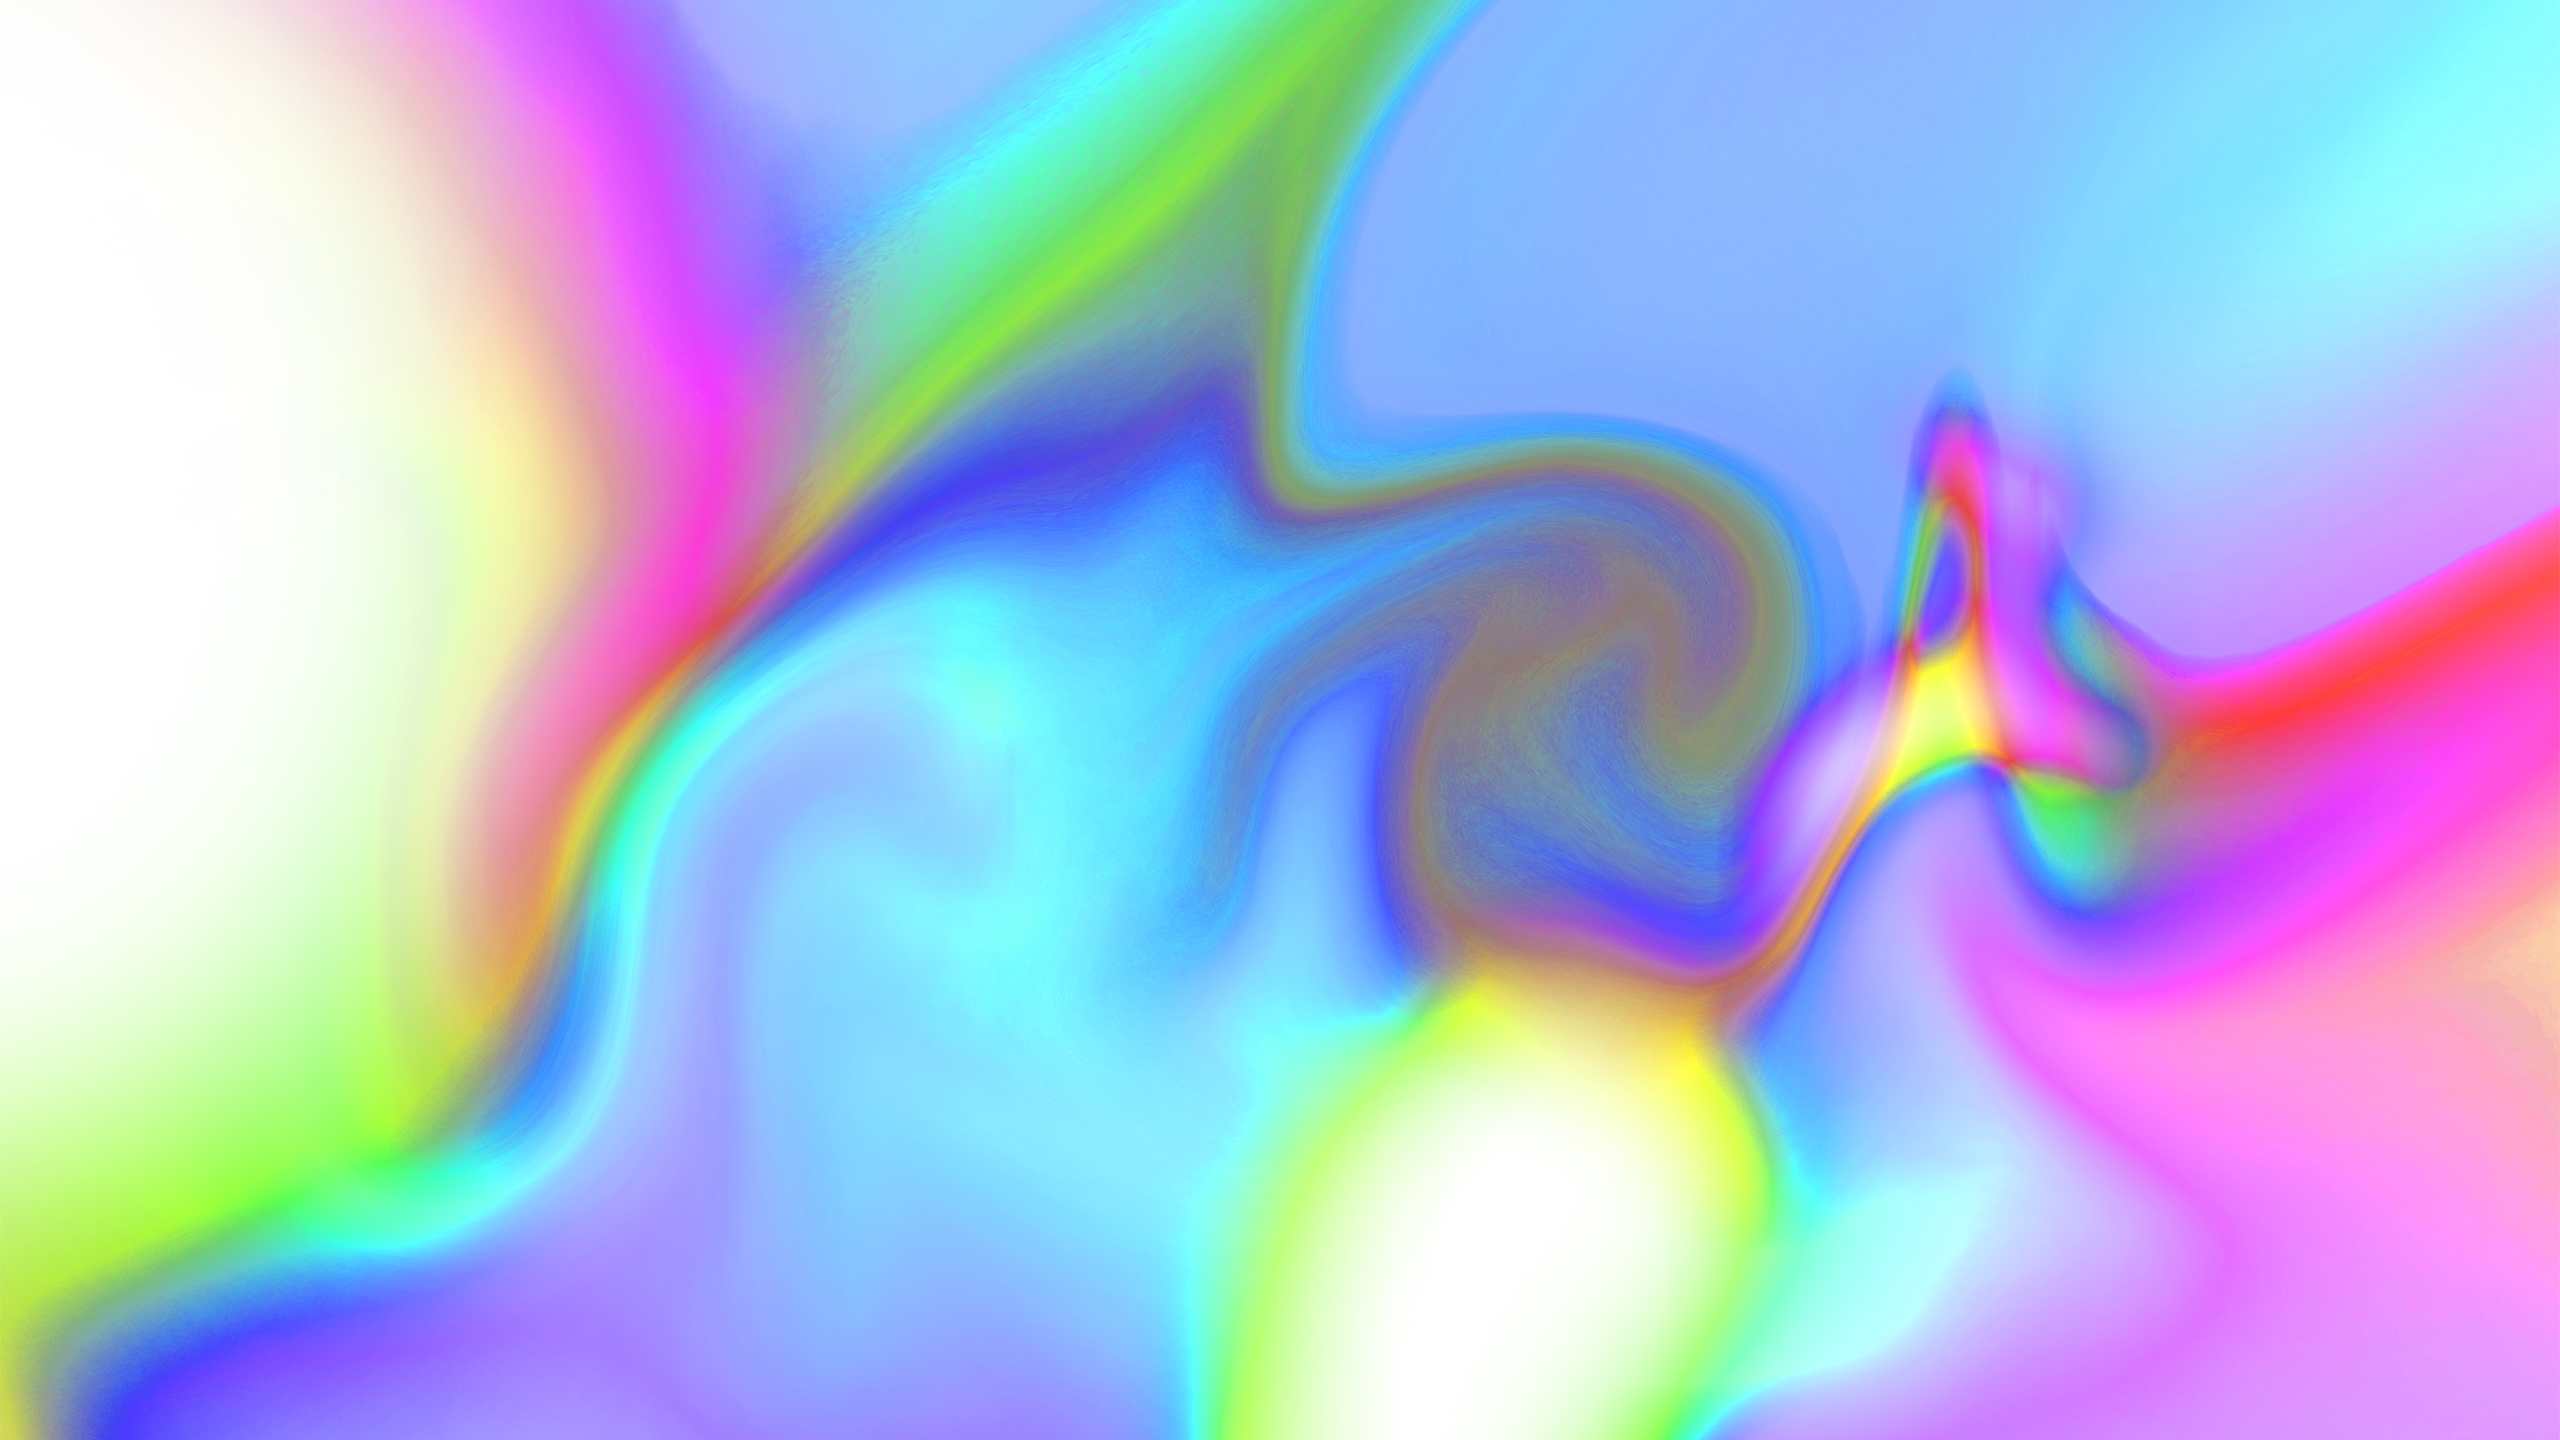 General 2560x1440 abstract photoshopped colorful holographic iridescent liquid gradient graphic design digital art